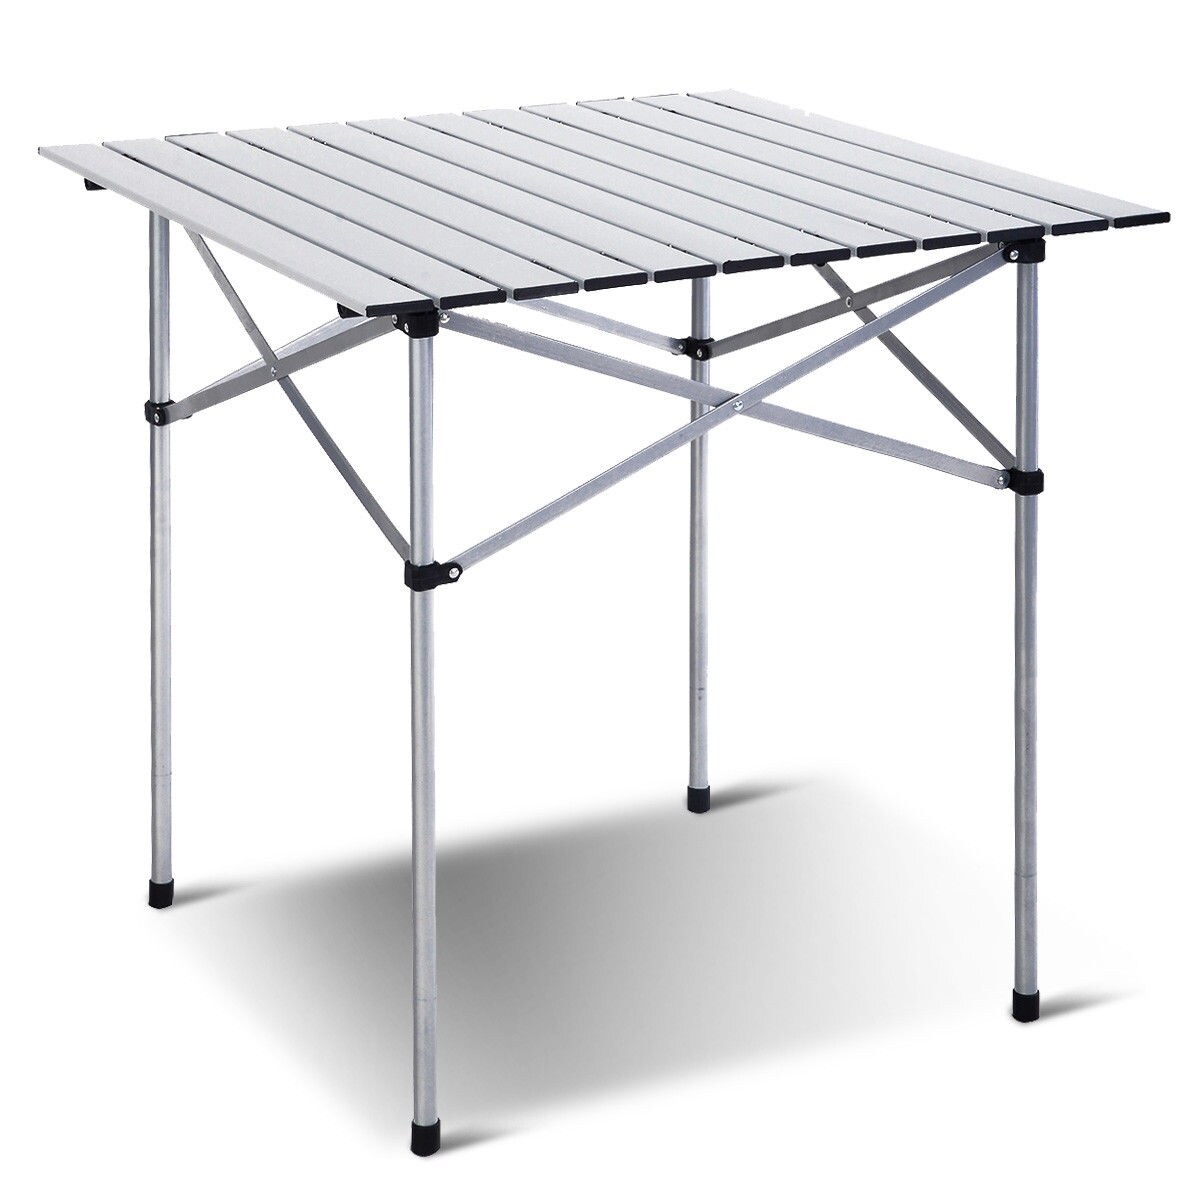 TRA Aluminium & Steel Folding Portable Picnic Outdoor Camping Table BBQ Party 